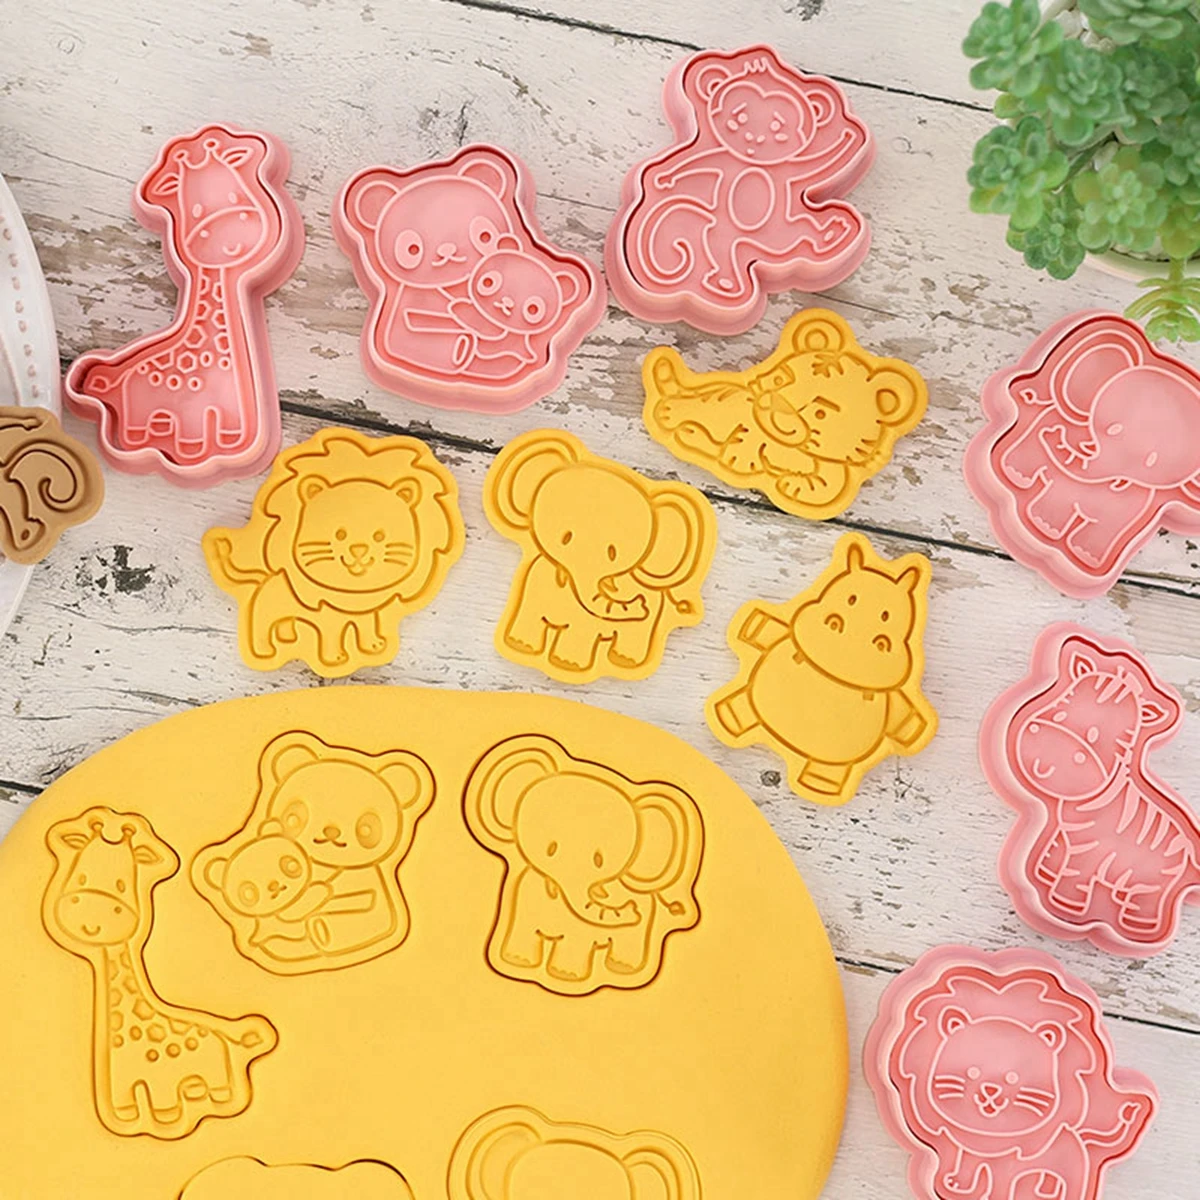 Jungle Safari Animal Cookie Cutter Mold DIY Cake Tools Jungle Birthday Party Decoration Kids Safari Party Supplies Baby Shower